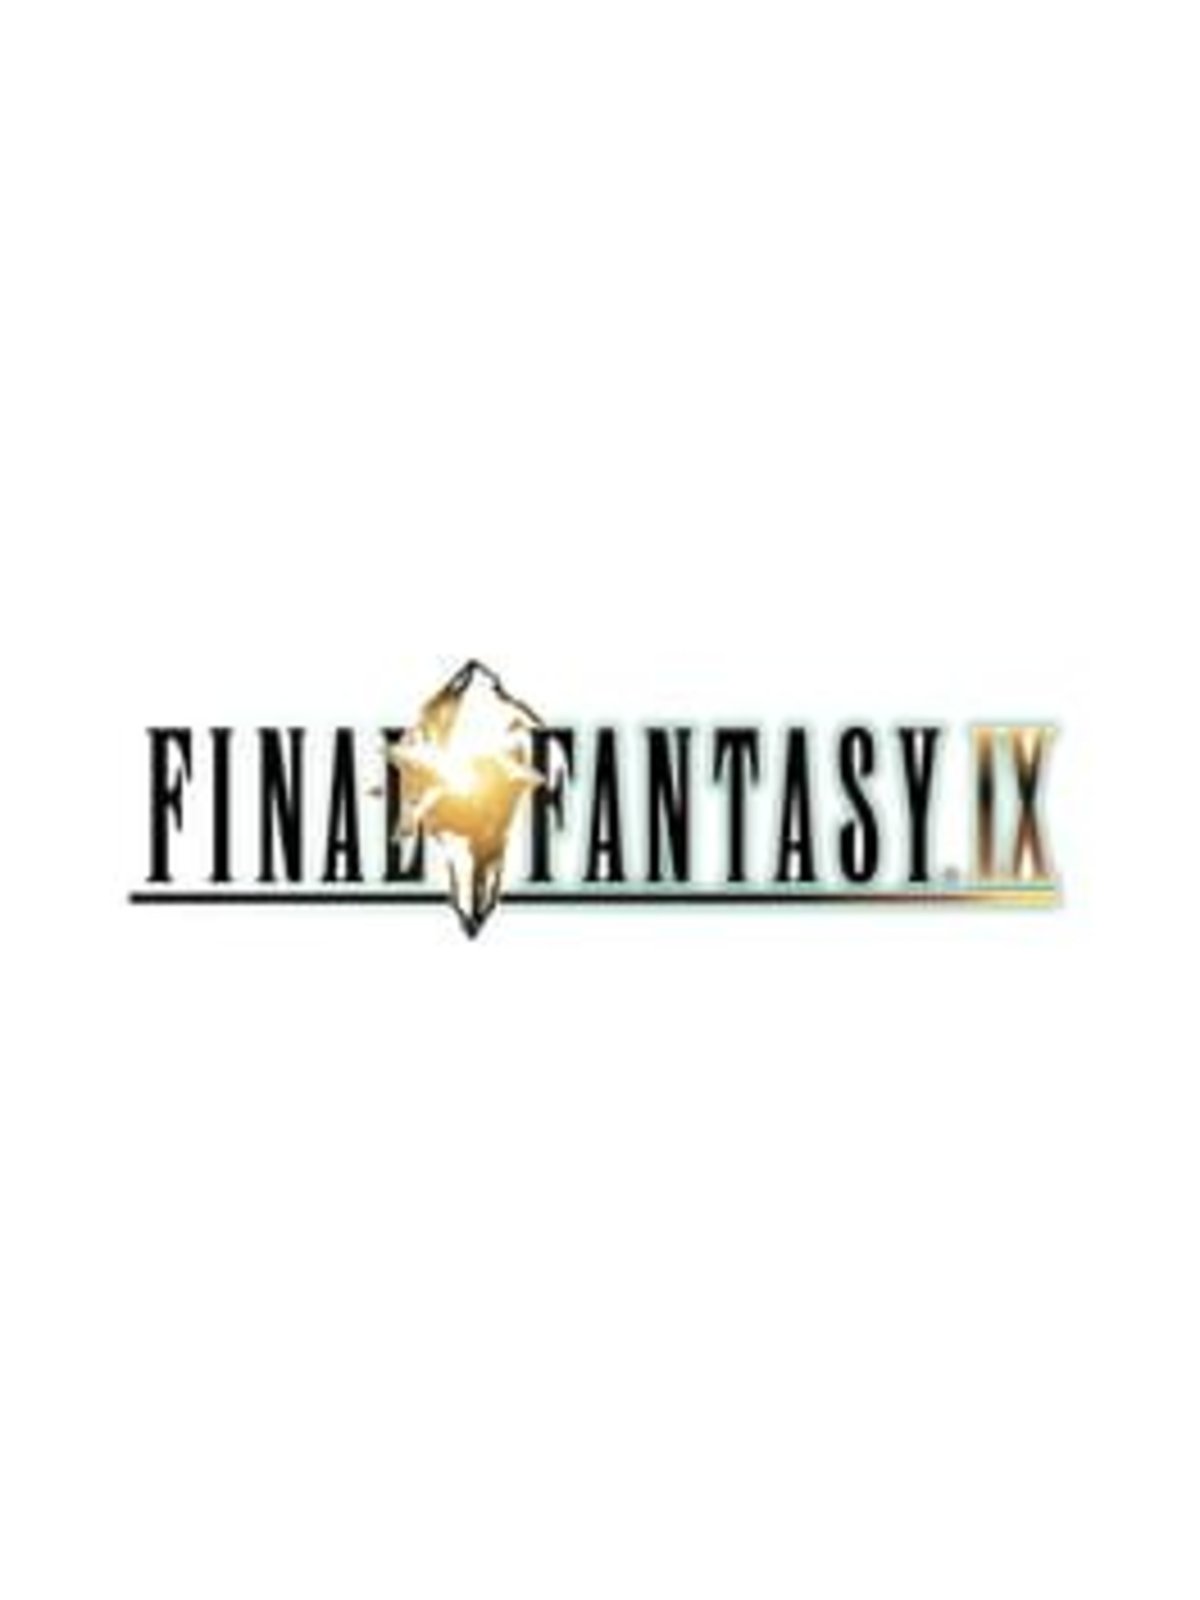 A Final Fantasy IX remake could be on the way from Square Enix